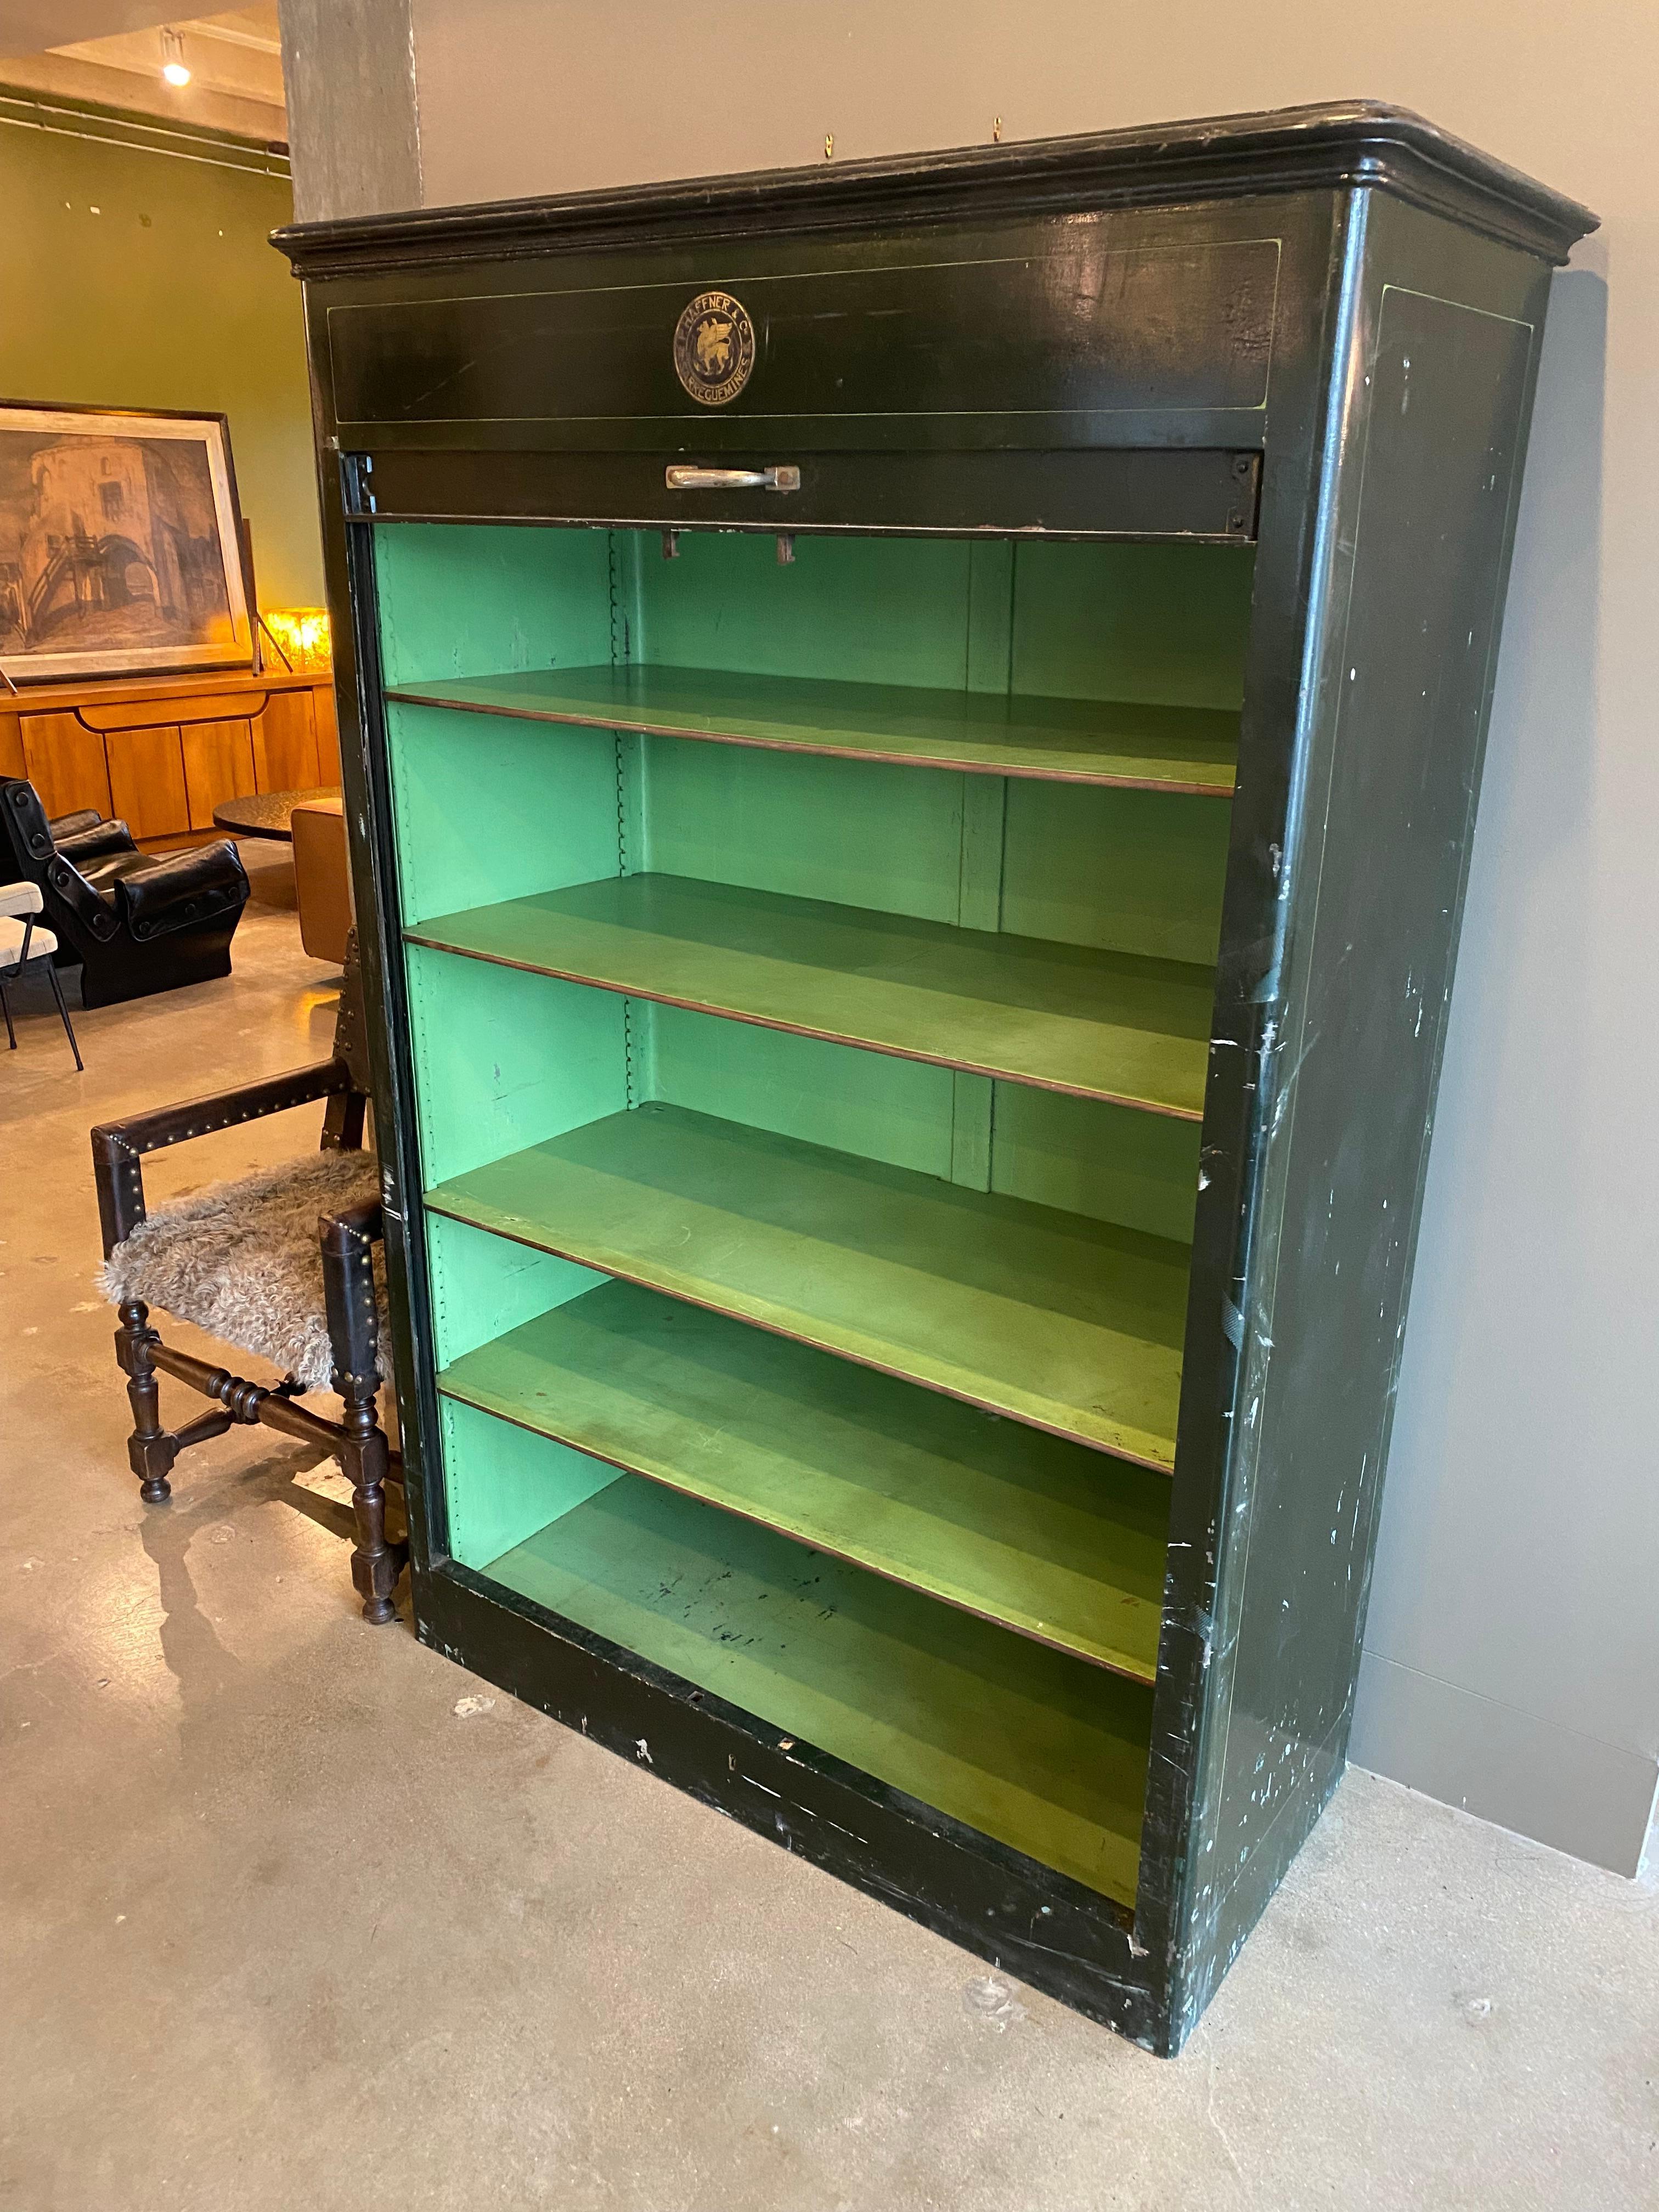 French industrial cabinet by hard-to-find maker, P. Haffner of Sarreguemines. Oversized steel structure in dark olive green with fine bright green interior and tambour door that rolls down from the top. Extraordinary color, brass hardware, label,